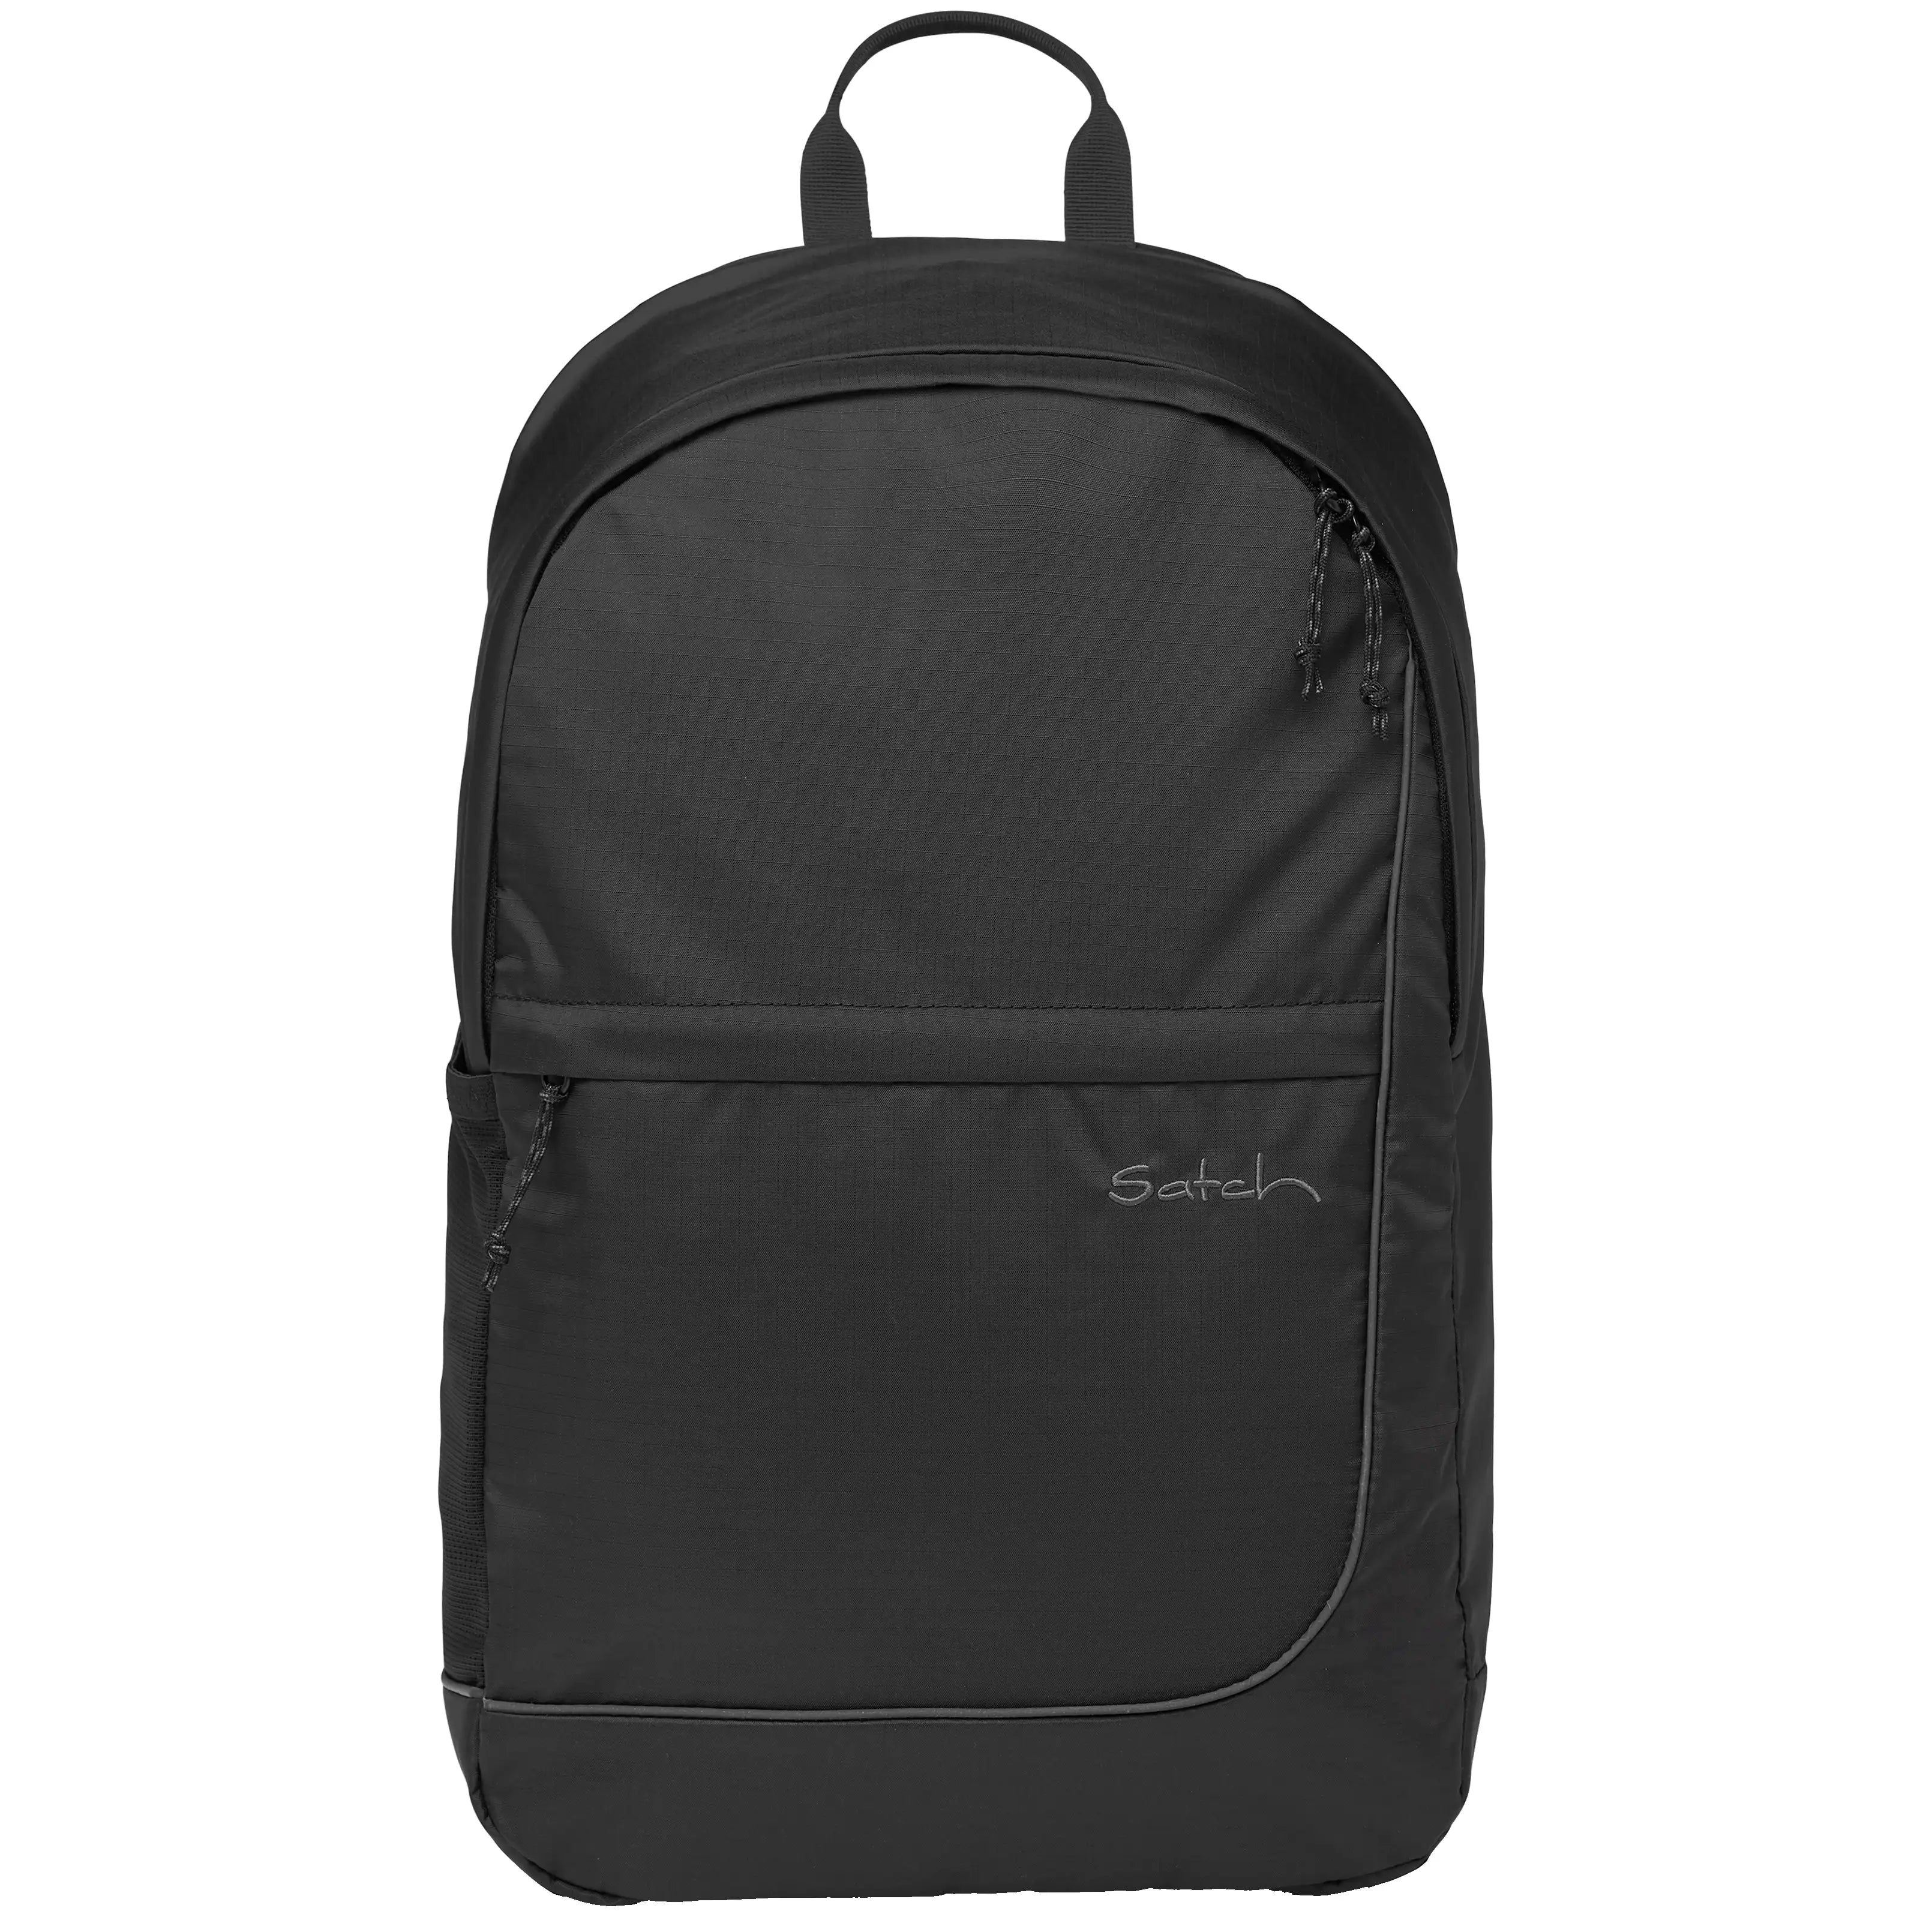 Satch Fly leisure backpack 45 cm - Ripstop Black